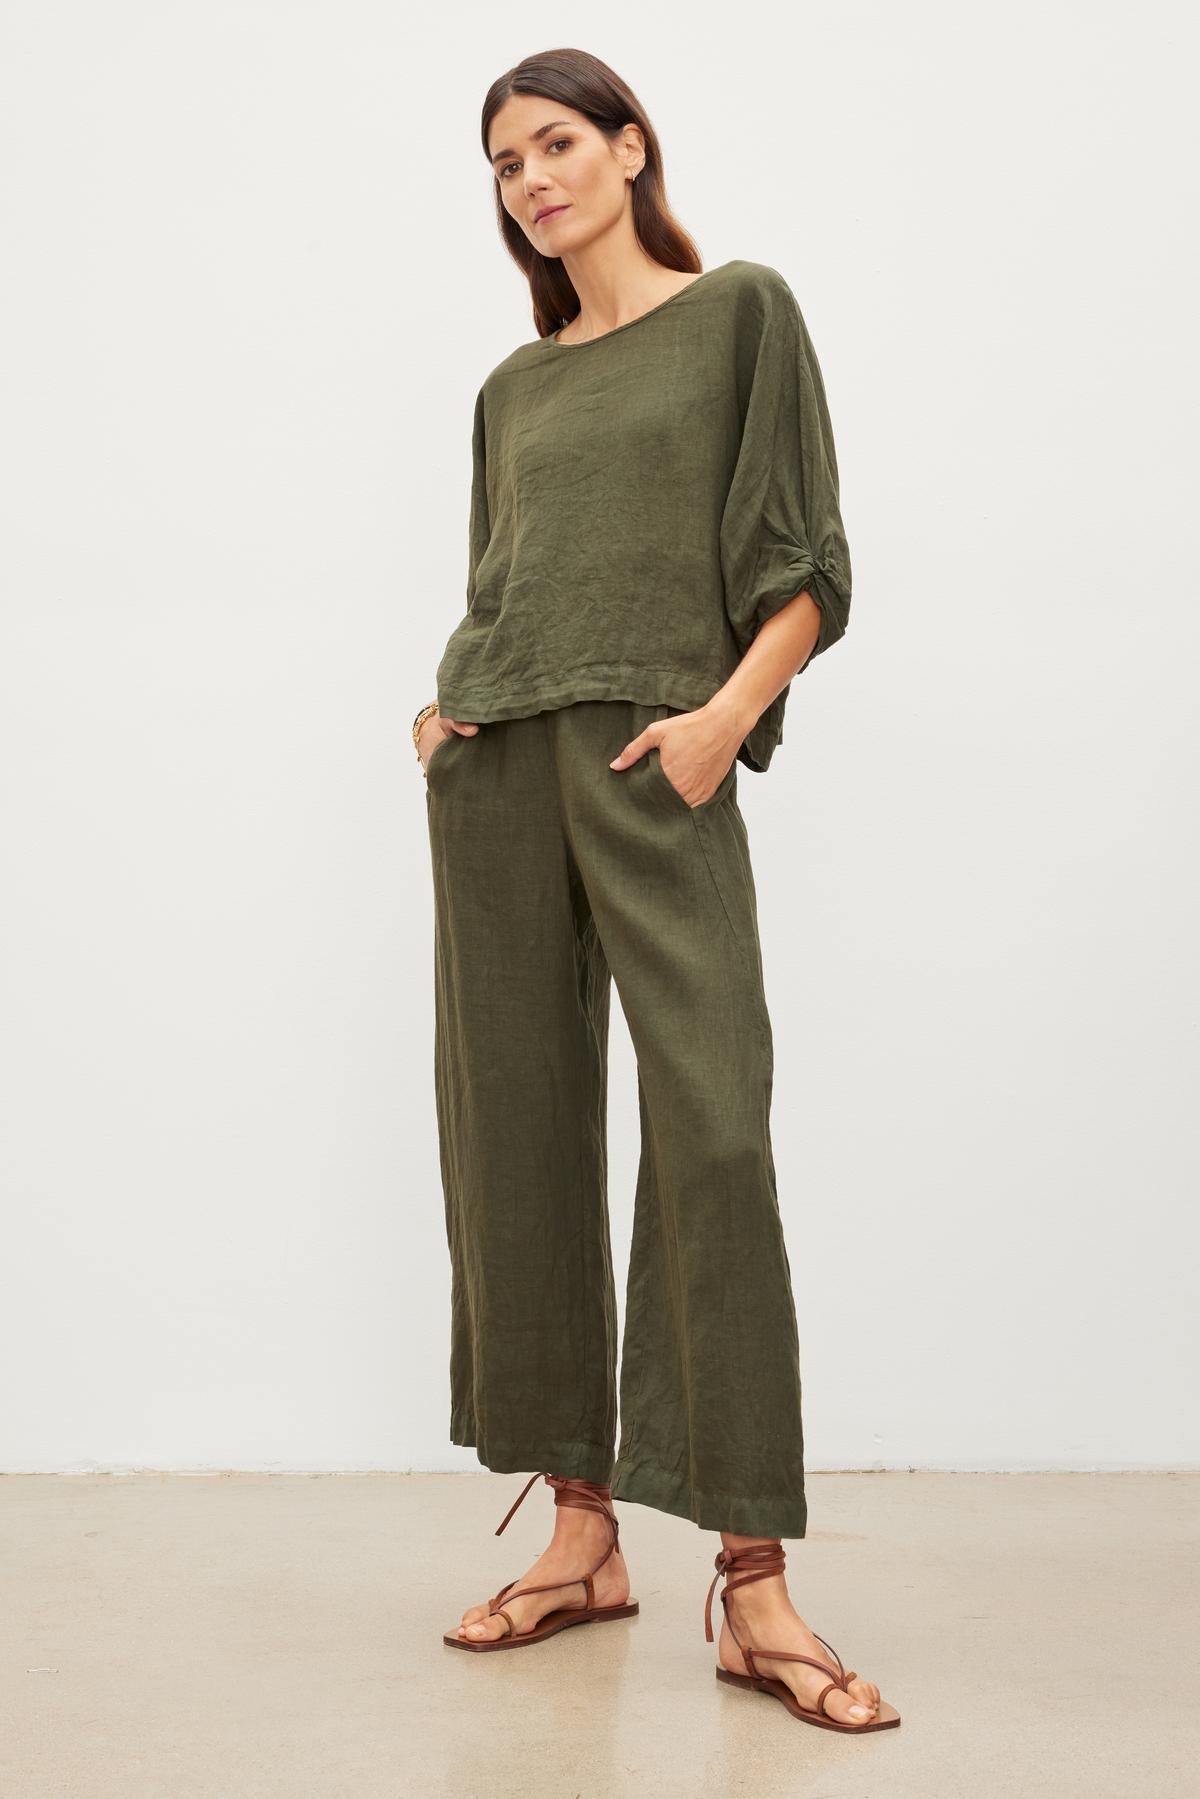 The perfect LOLA LINEN PANT by Velvet by Graham & Spencer in lightweight olive green, featuring an elastic waist.-36002694299841